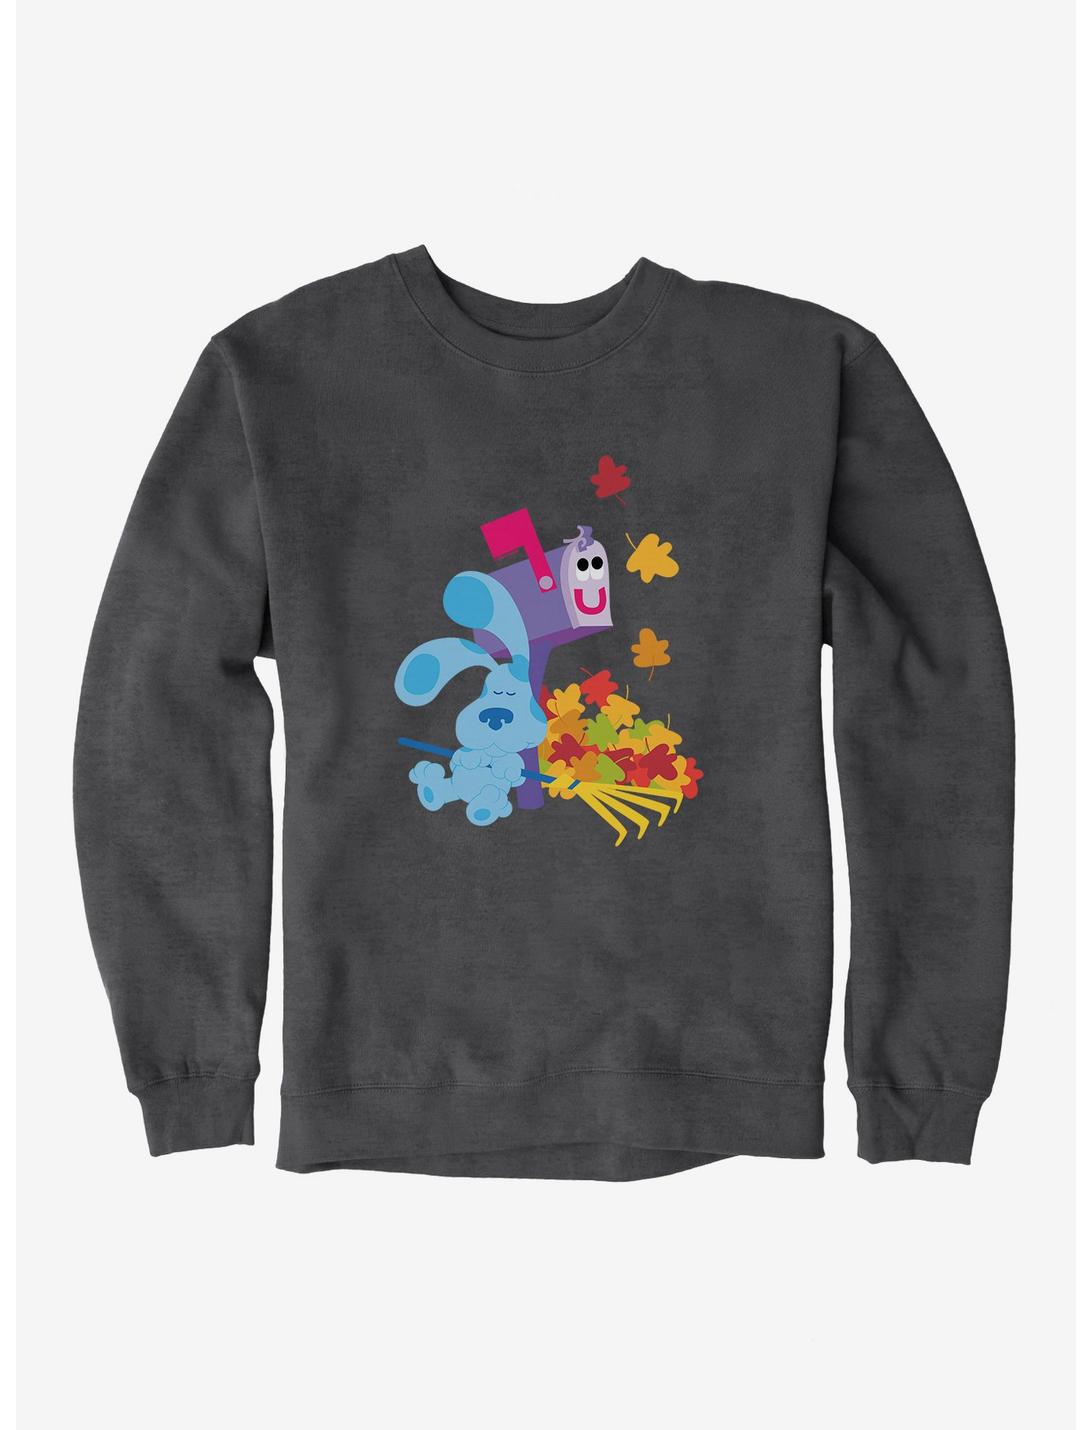 Blue's Clues Mailbox And Blue Autumn Leaves Sweatshirt, CHARCOAL HEATHER, hi-res